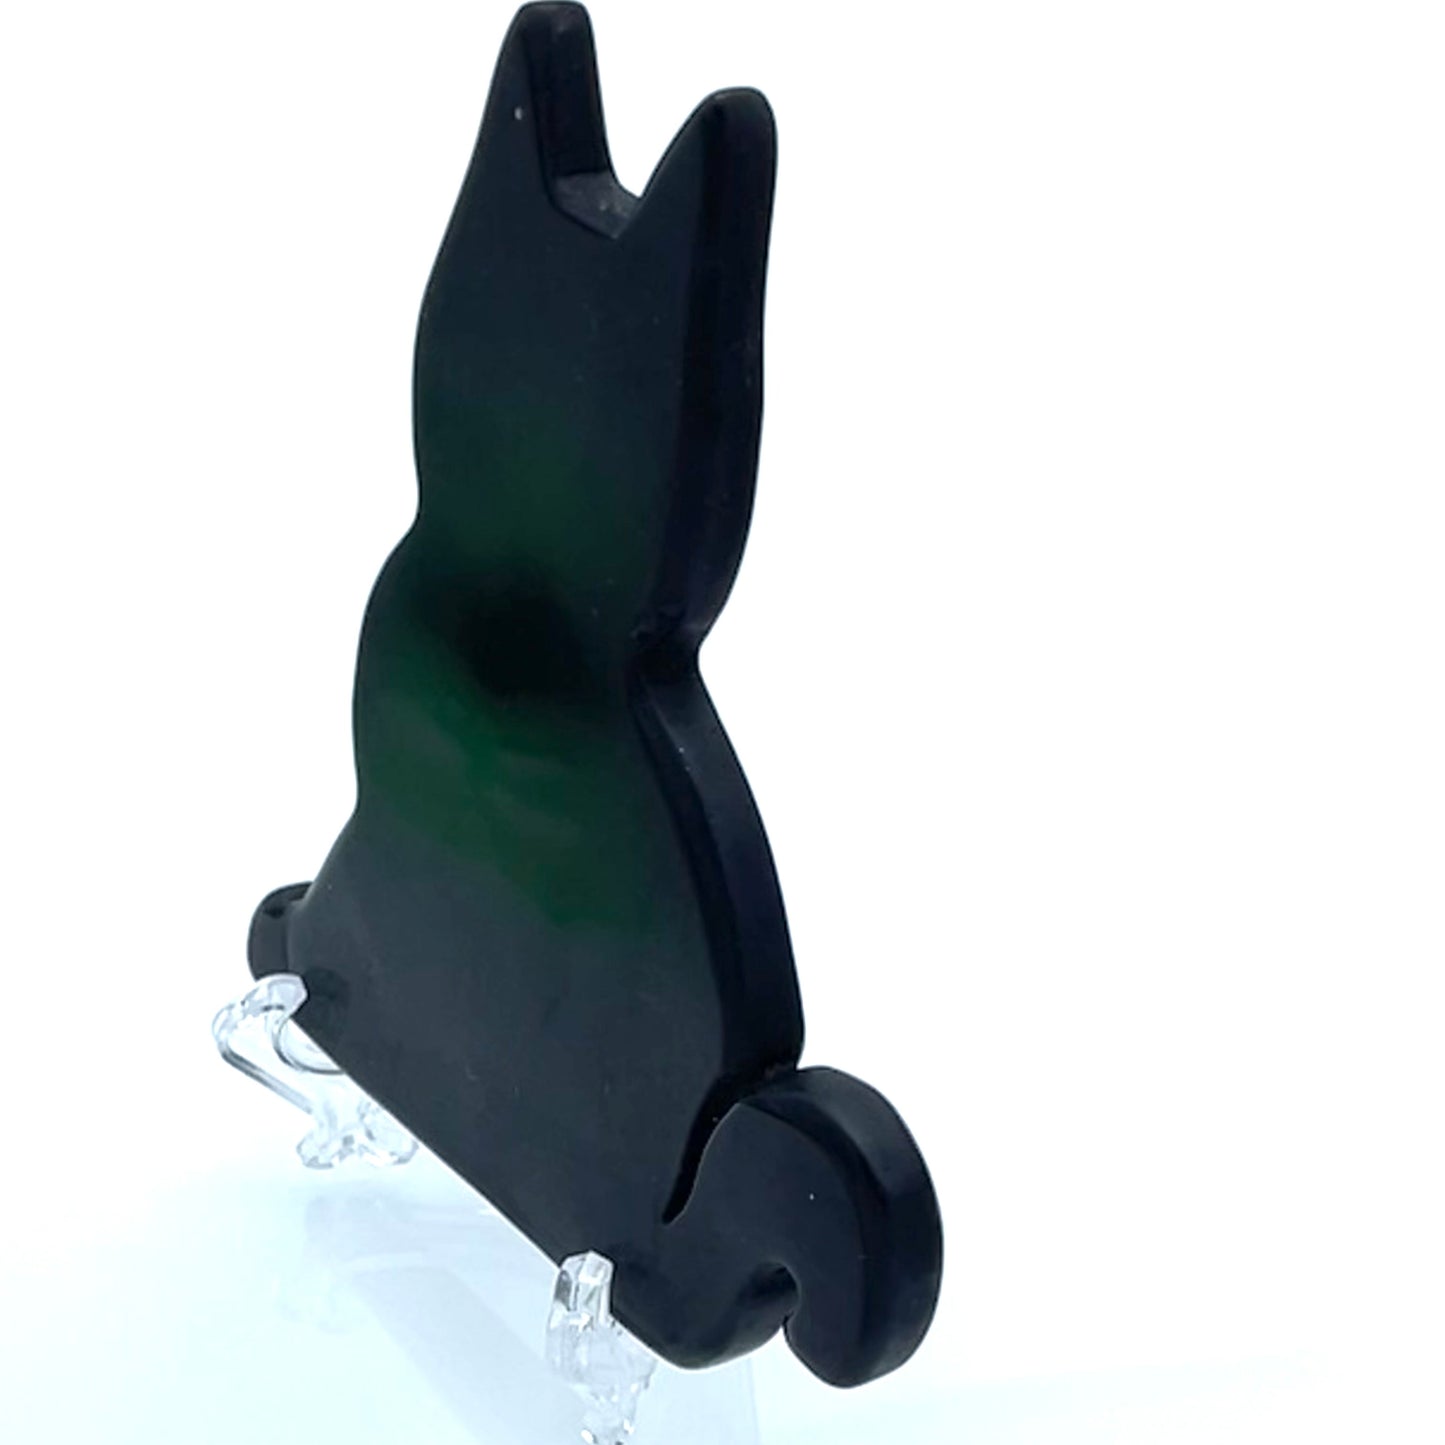 Black Obsidian gemstone awKitty Cat with stand